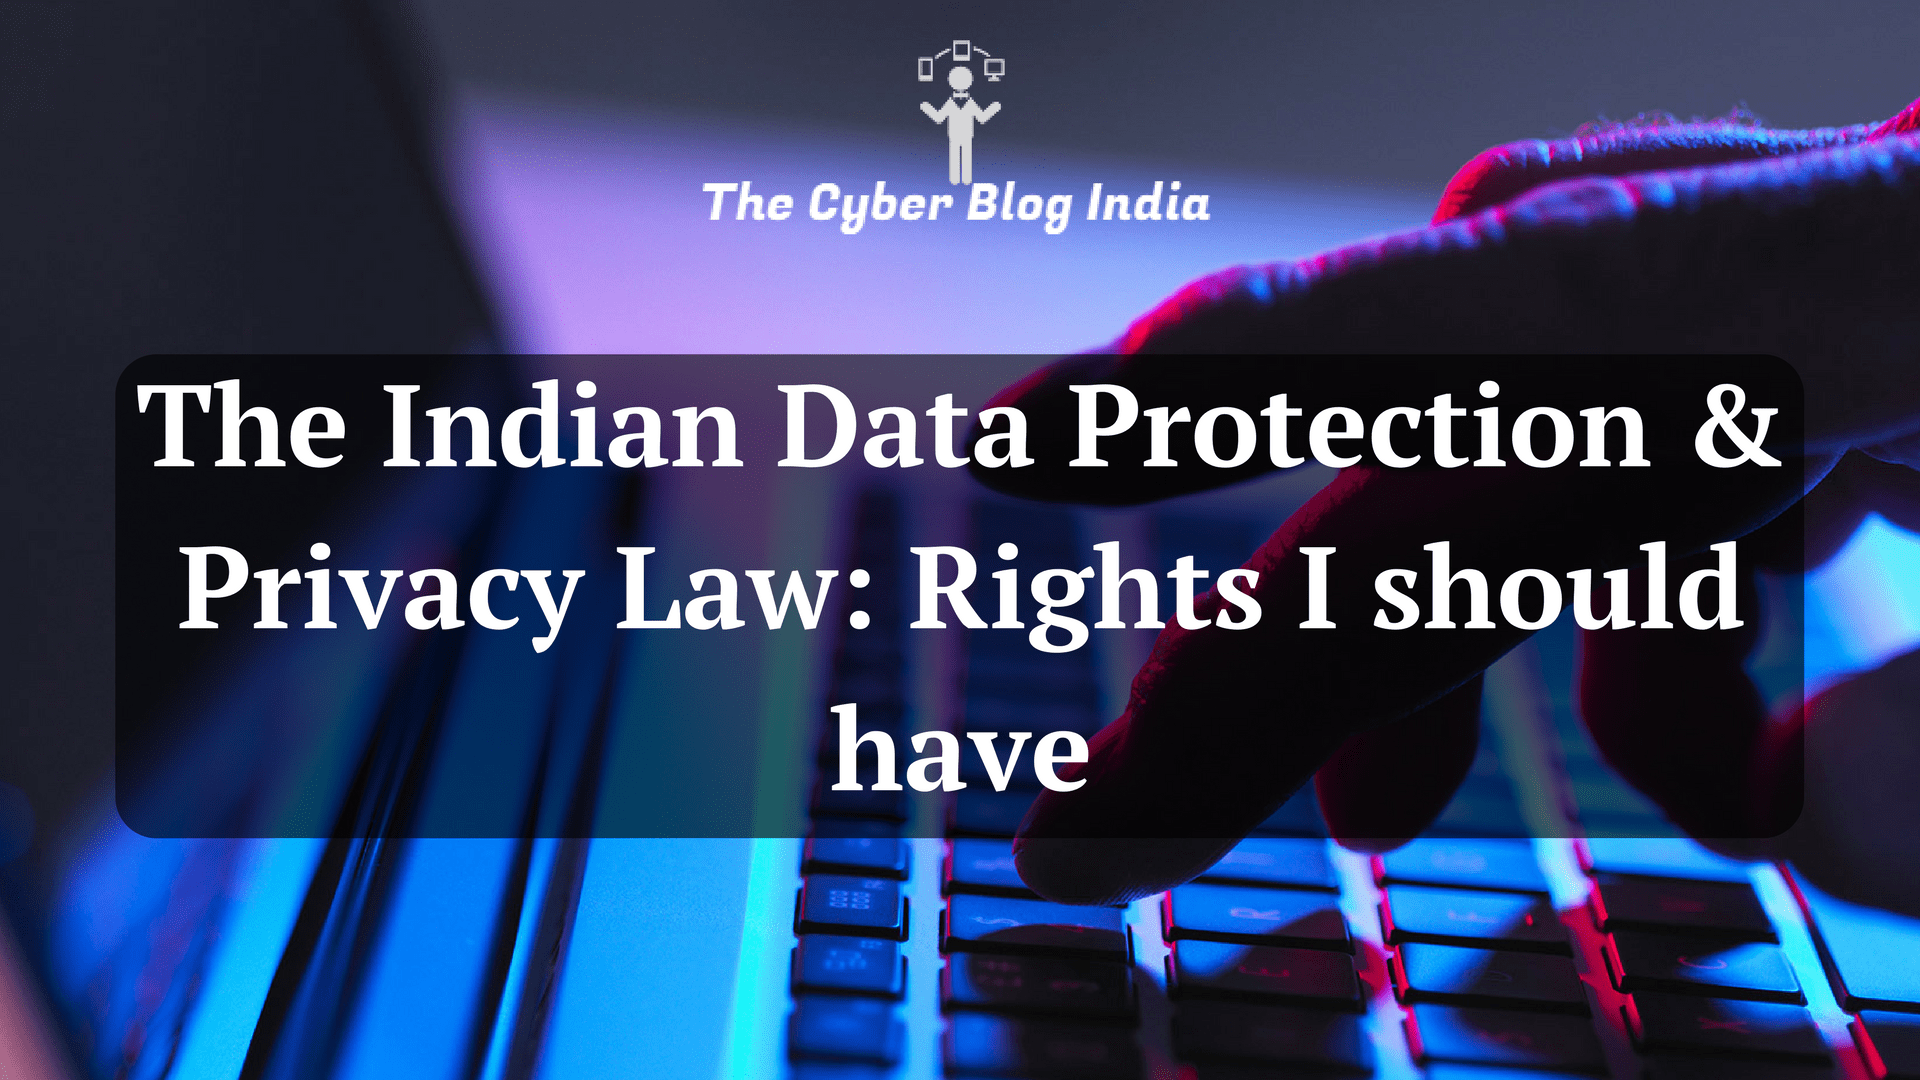 The Indian Data Protection & Privacy law- Rights I should have